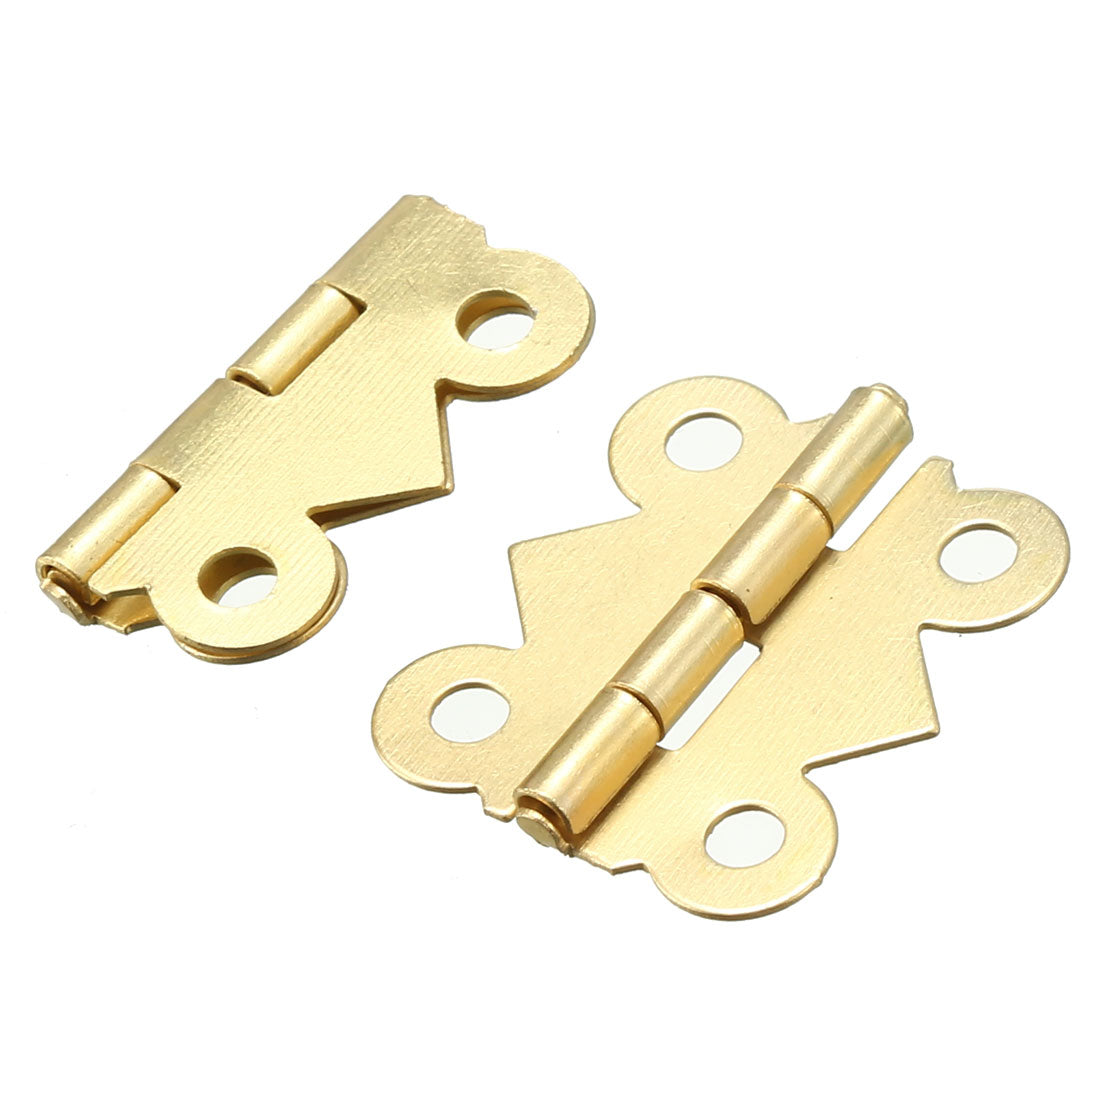 uxcell Uxcell 20 Pcs Brass Tone Foldable Rotatable Cupboard Cabinet Window Drawer Gate Door Hinges Hardware 2cm Long w Screws